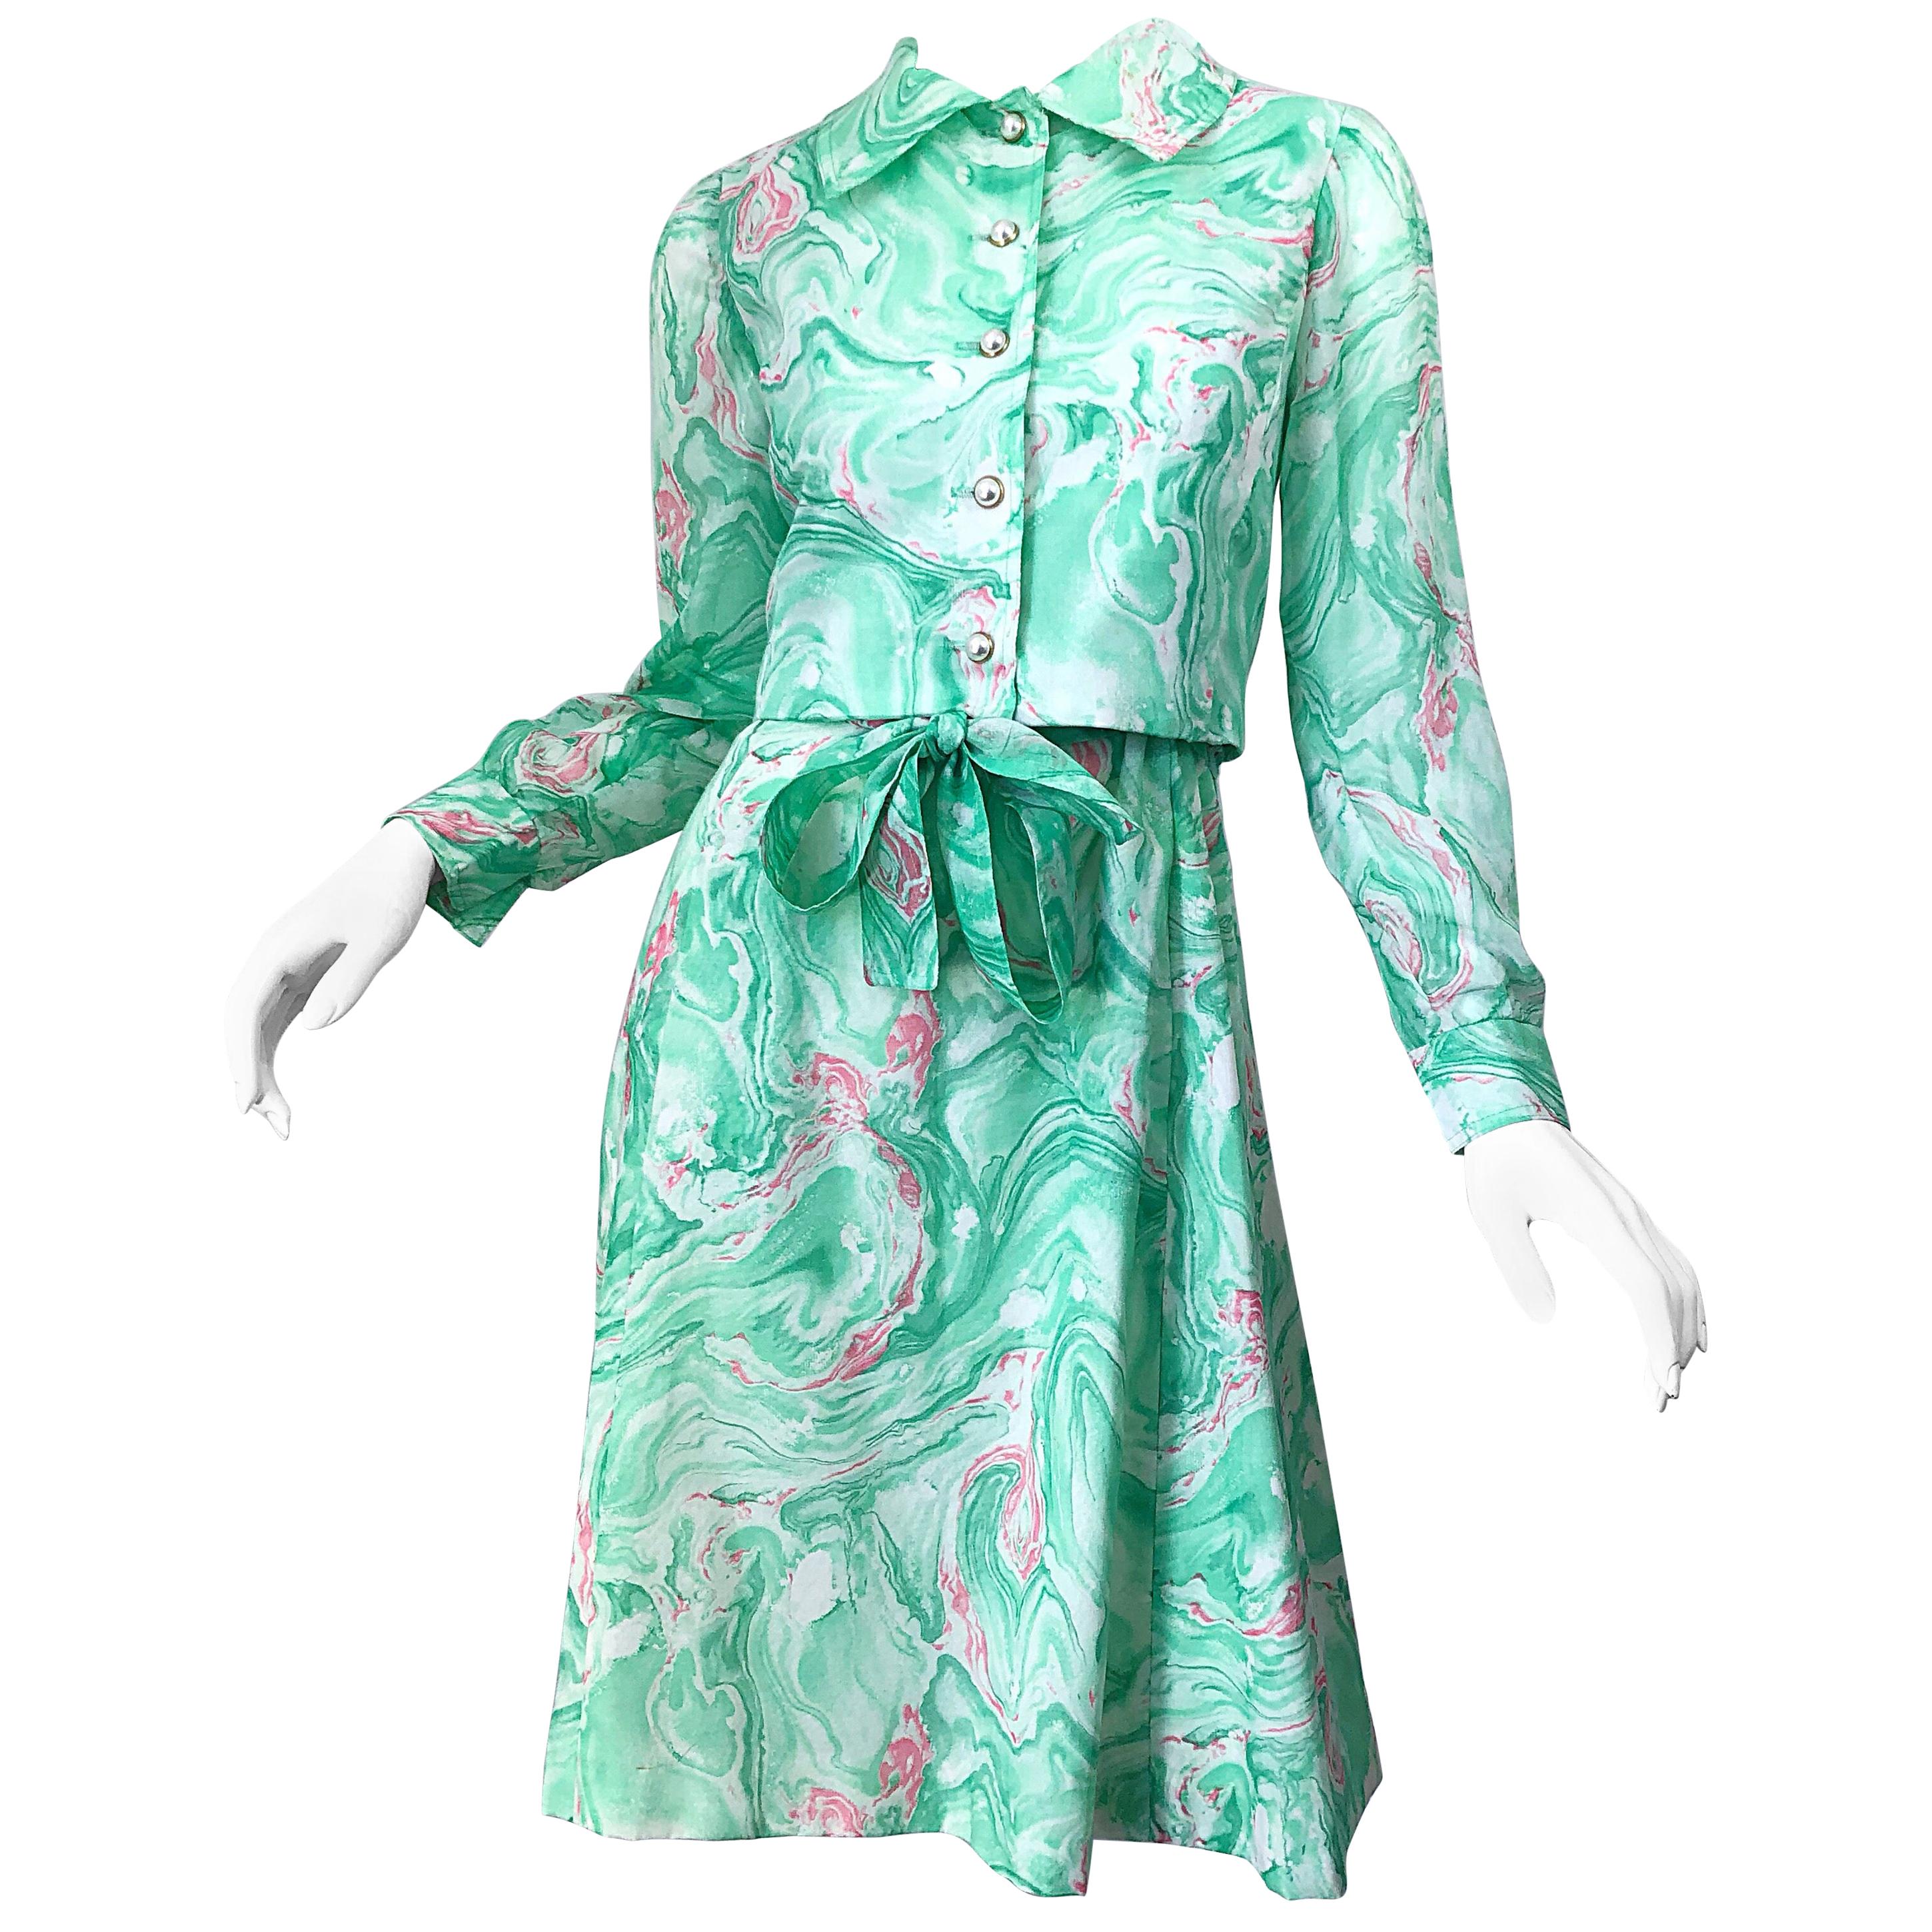 Chic 1960s Pastel Green and Pink Swirl Print A Line 60s Dress and Cropped Jacket